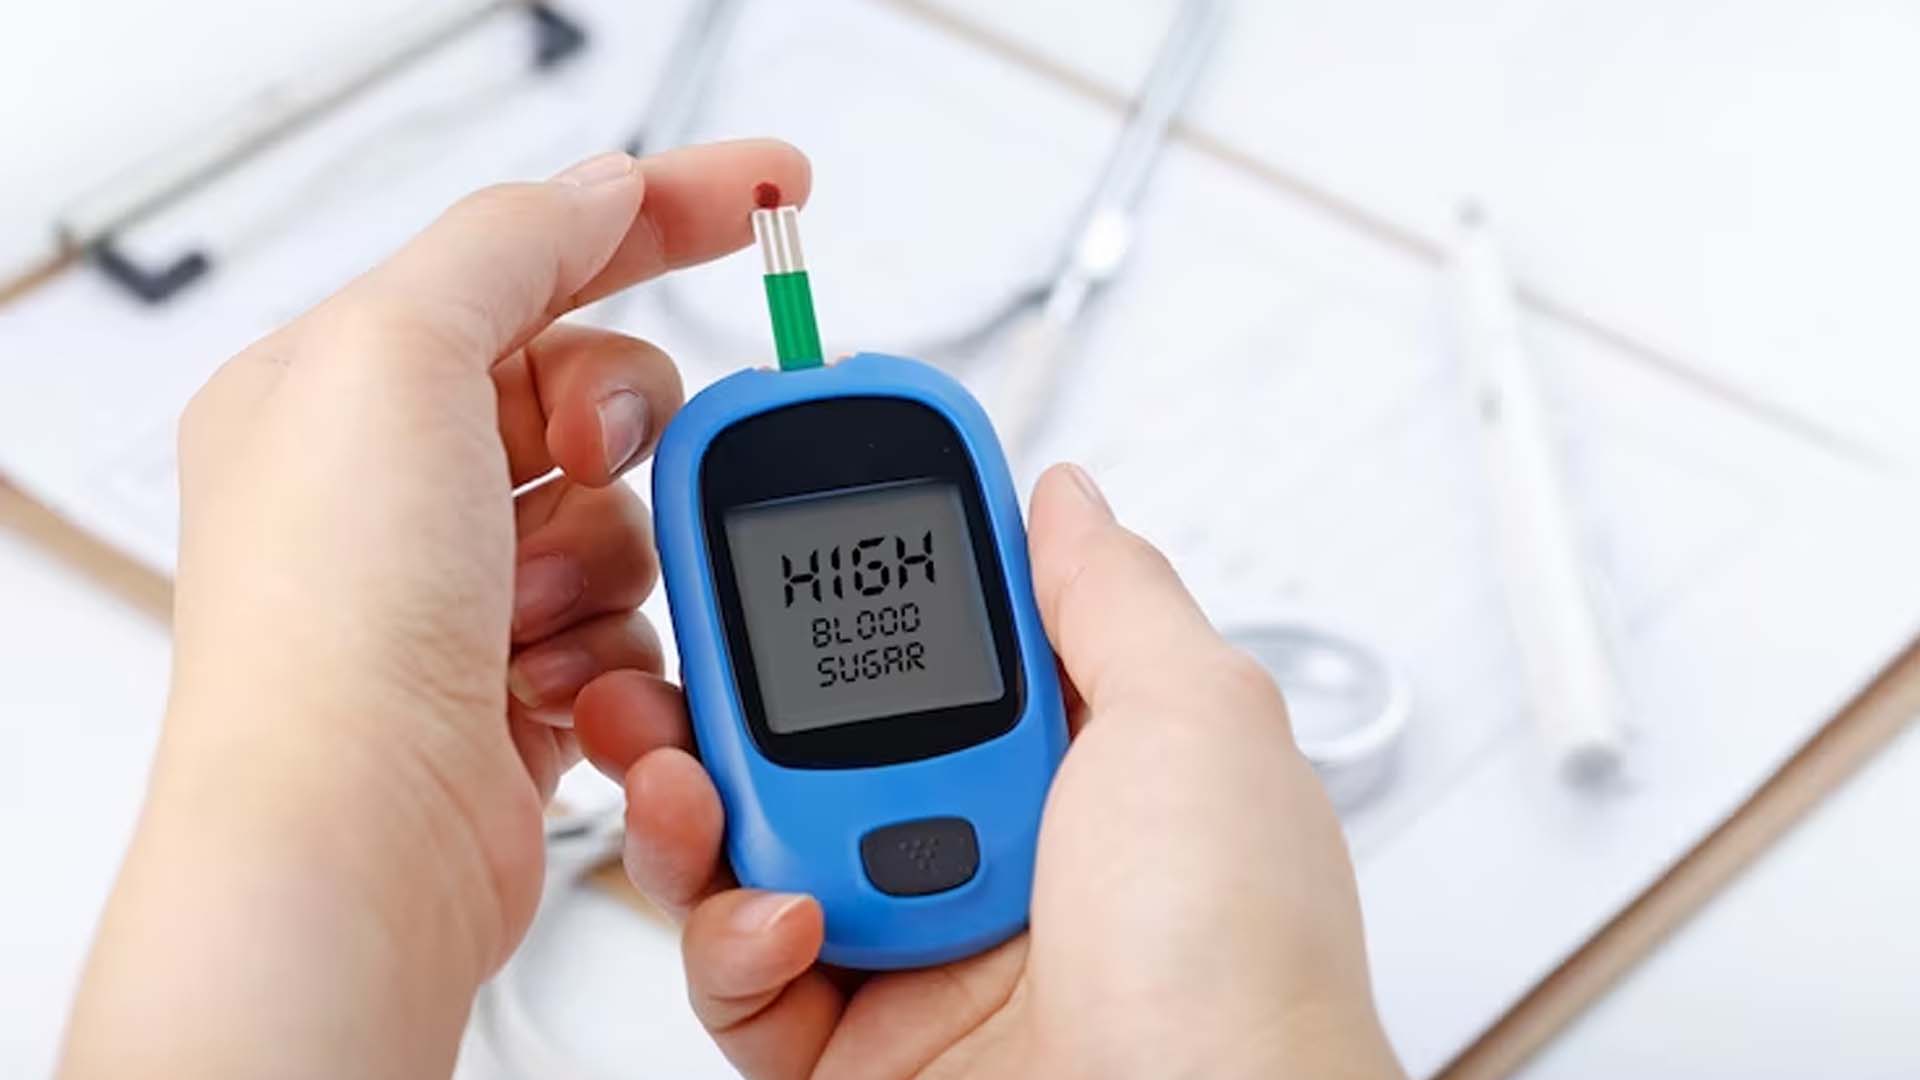 Monitor showing High Blood Sugar Levels